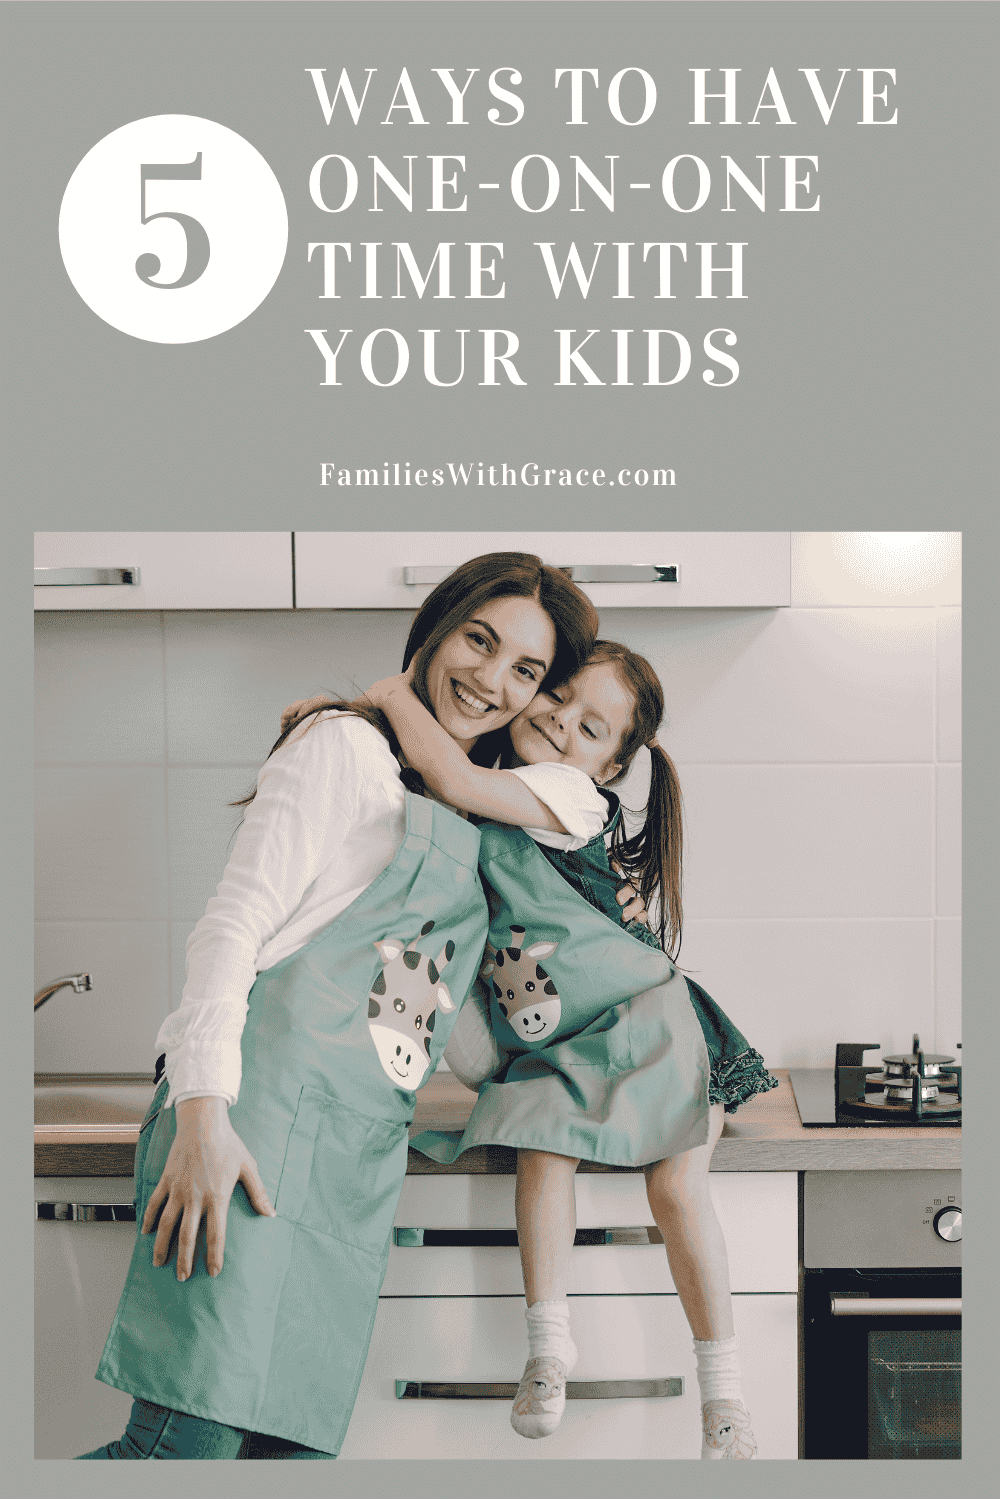 5 ways to have one-on-one time with your kids